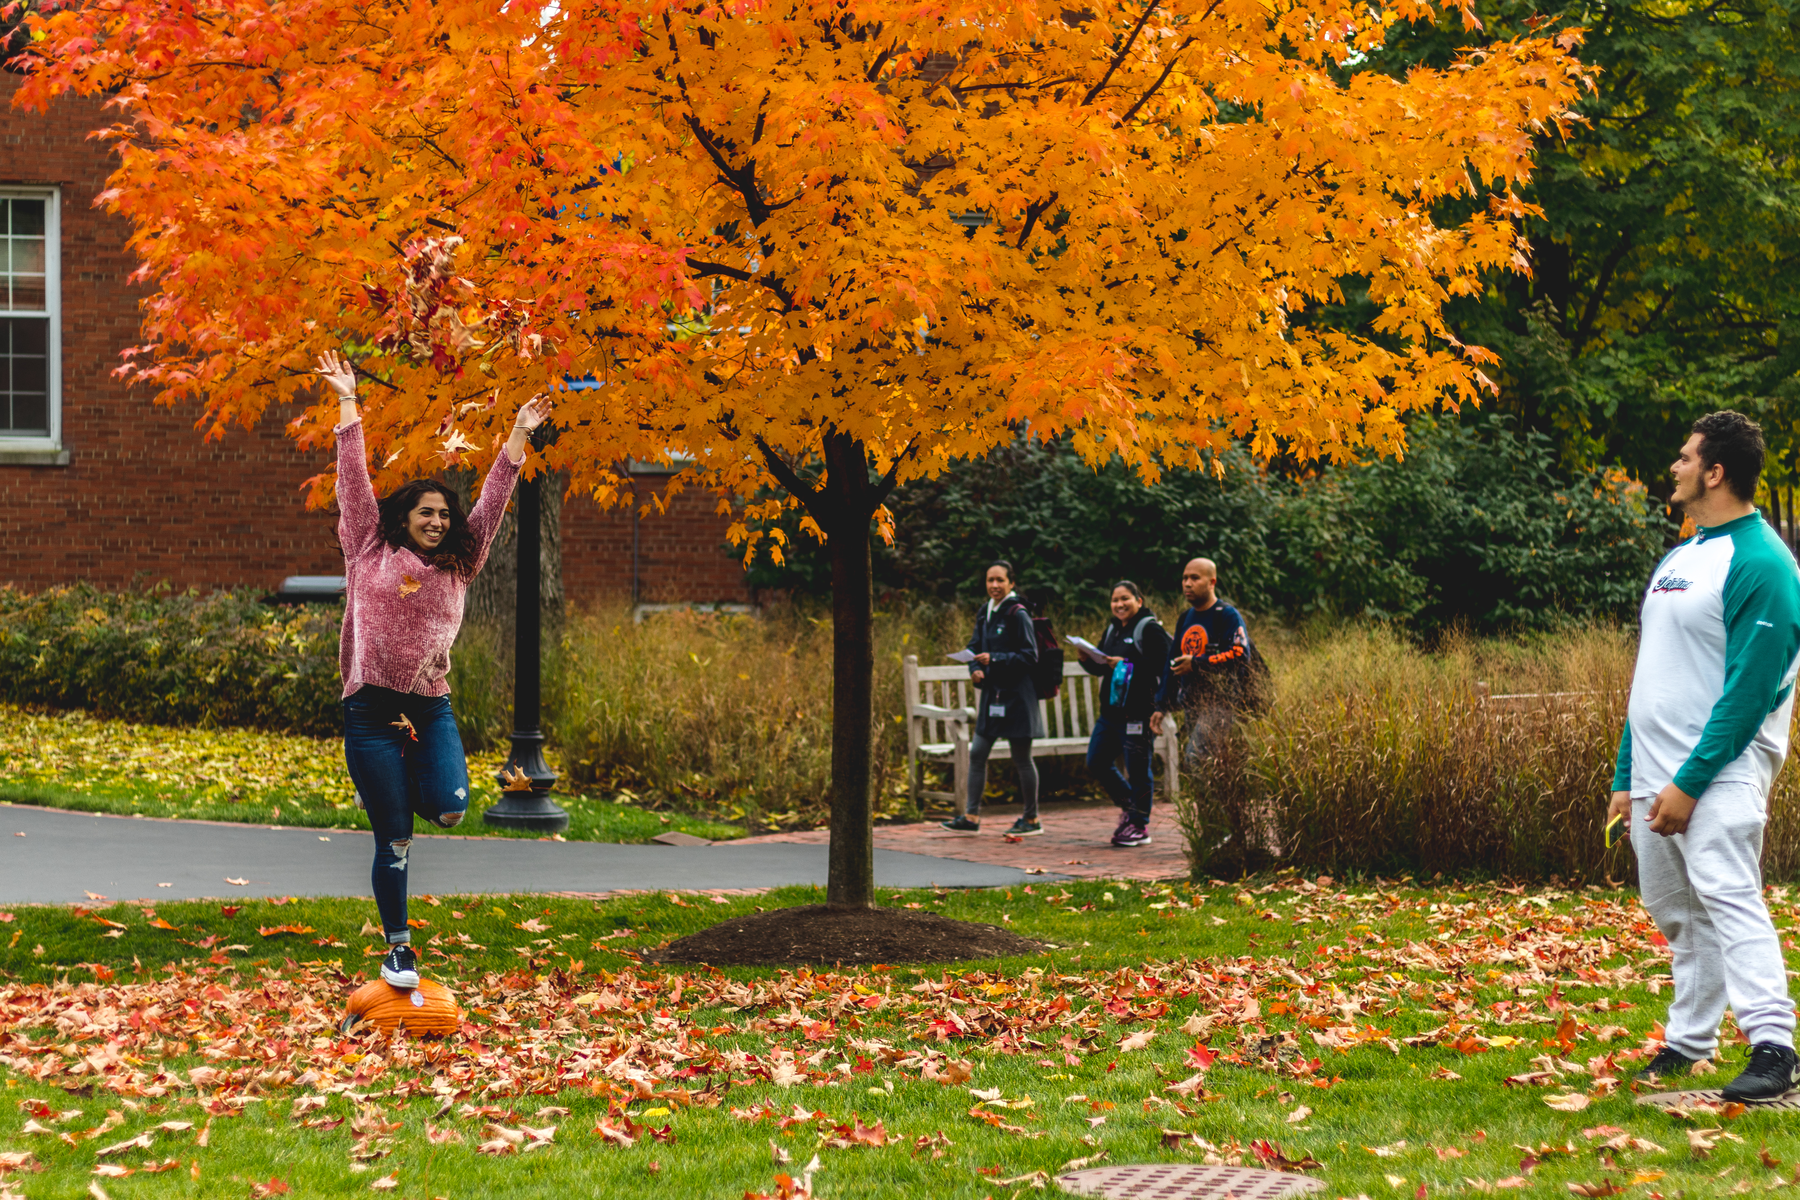 Female student balances on a pumpkin under tree with bright orange leaves. Other students stroll across the greenspace. Campus reopens for the fall 2020 semester, following closure due to COVID-19 concerns.